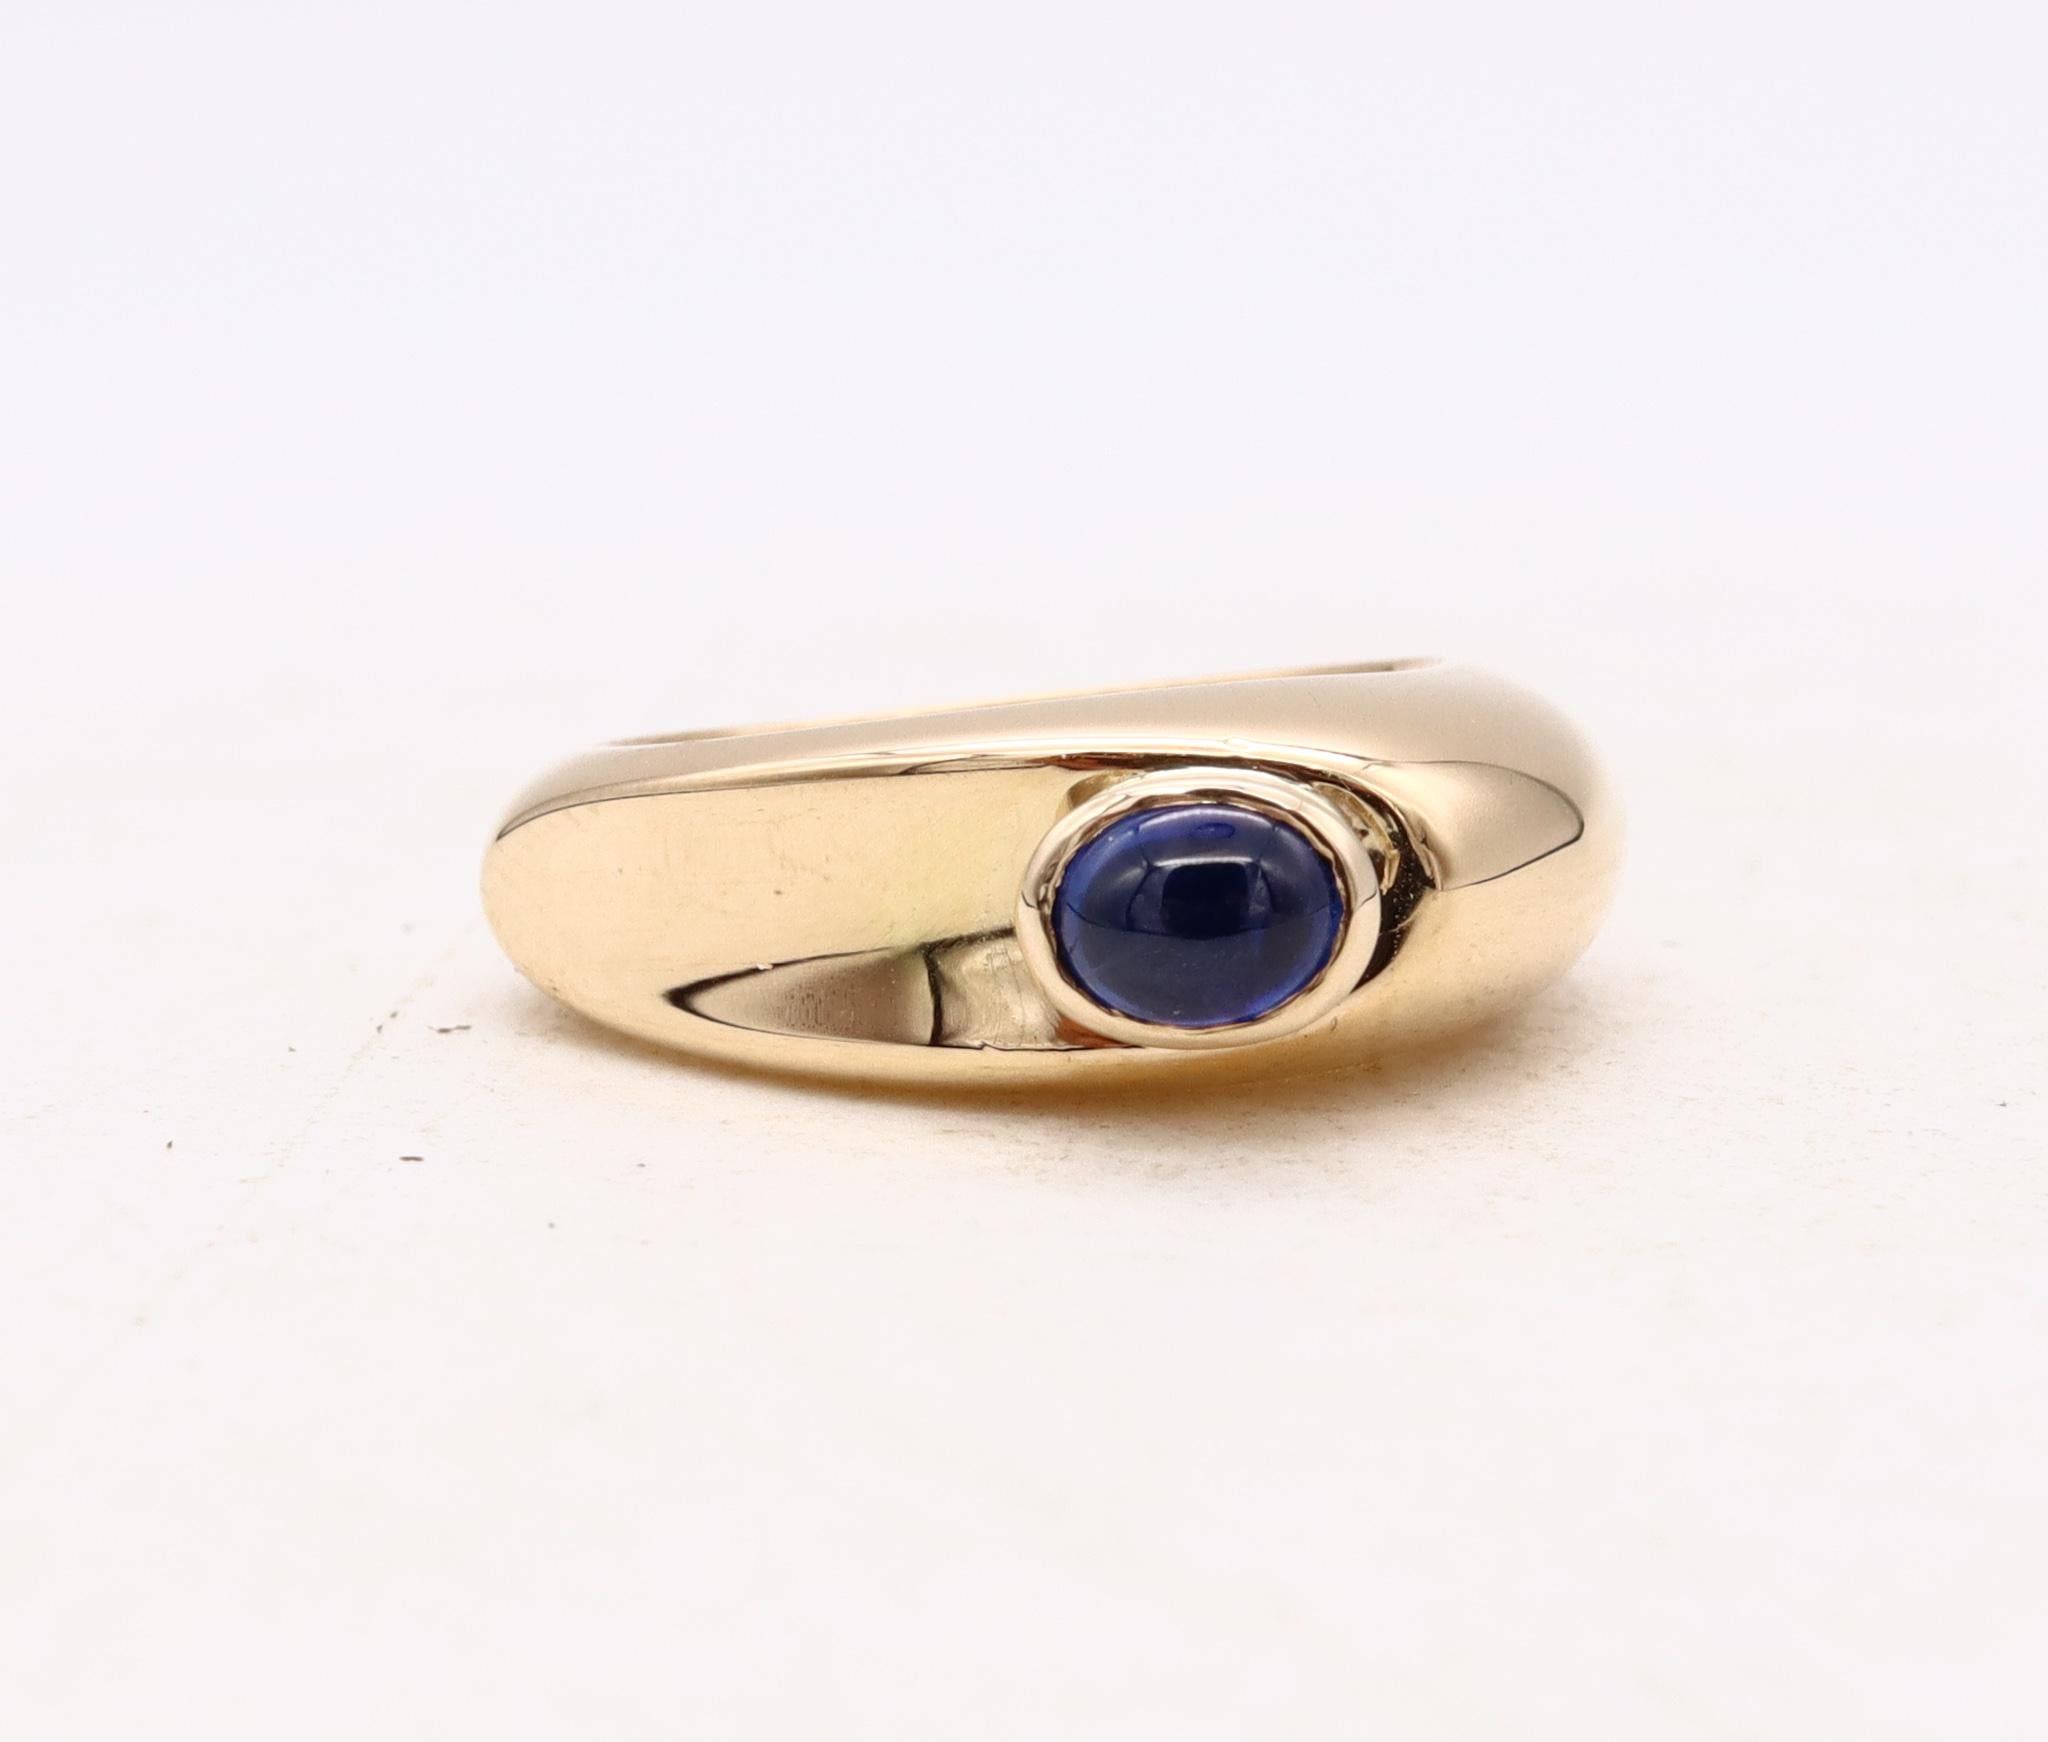 Fred of Paris Modernist Gem Set Ring 18Kt Yellow Gold 0.96 Cts Ceylon Sapphire For Sale 4